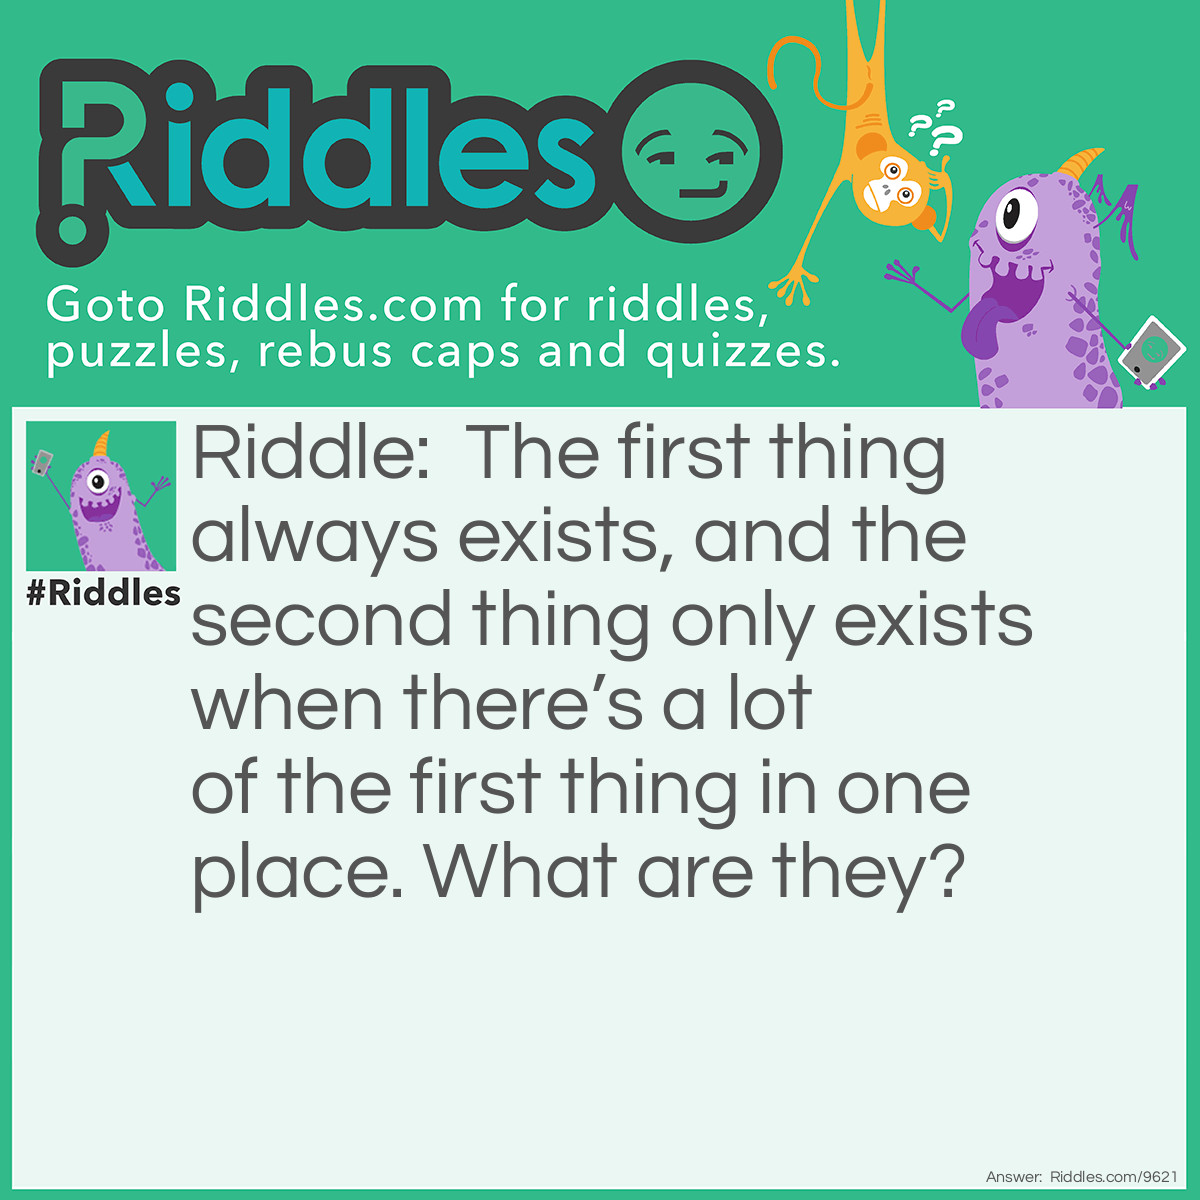 Riddle: The first thing always exists, and the second thing only exists when there's a lot of the first thing in one place. What are they? Answer: Cars and traffic.